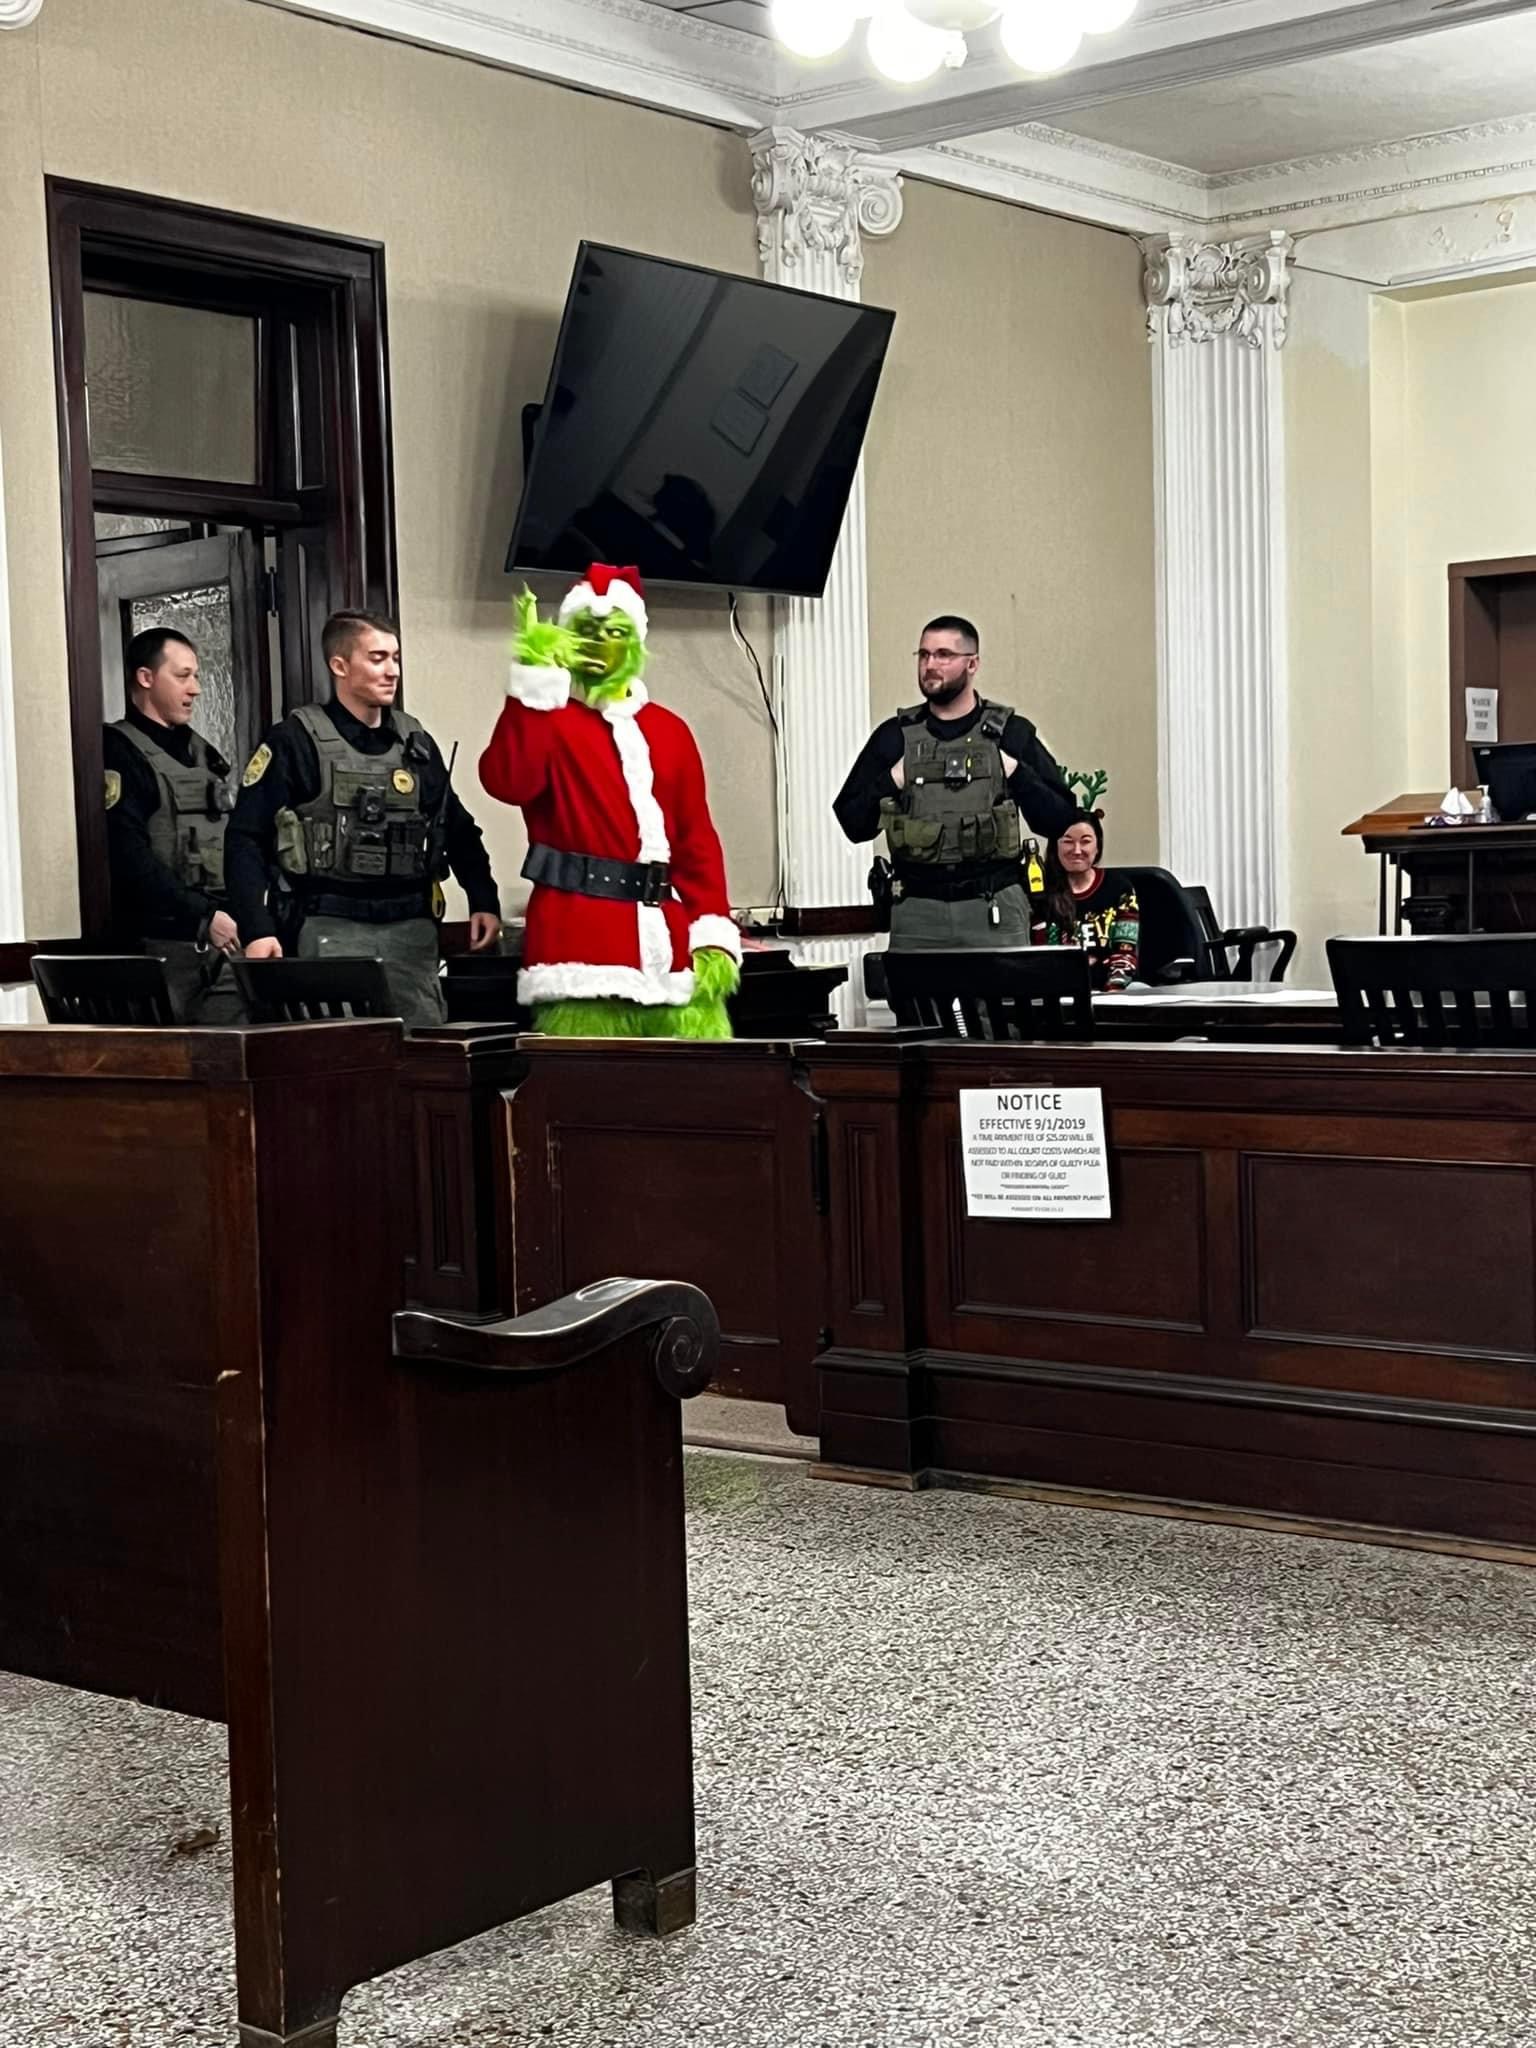 The Grinch being escorted into the courtroom by LCSO staff